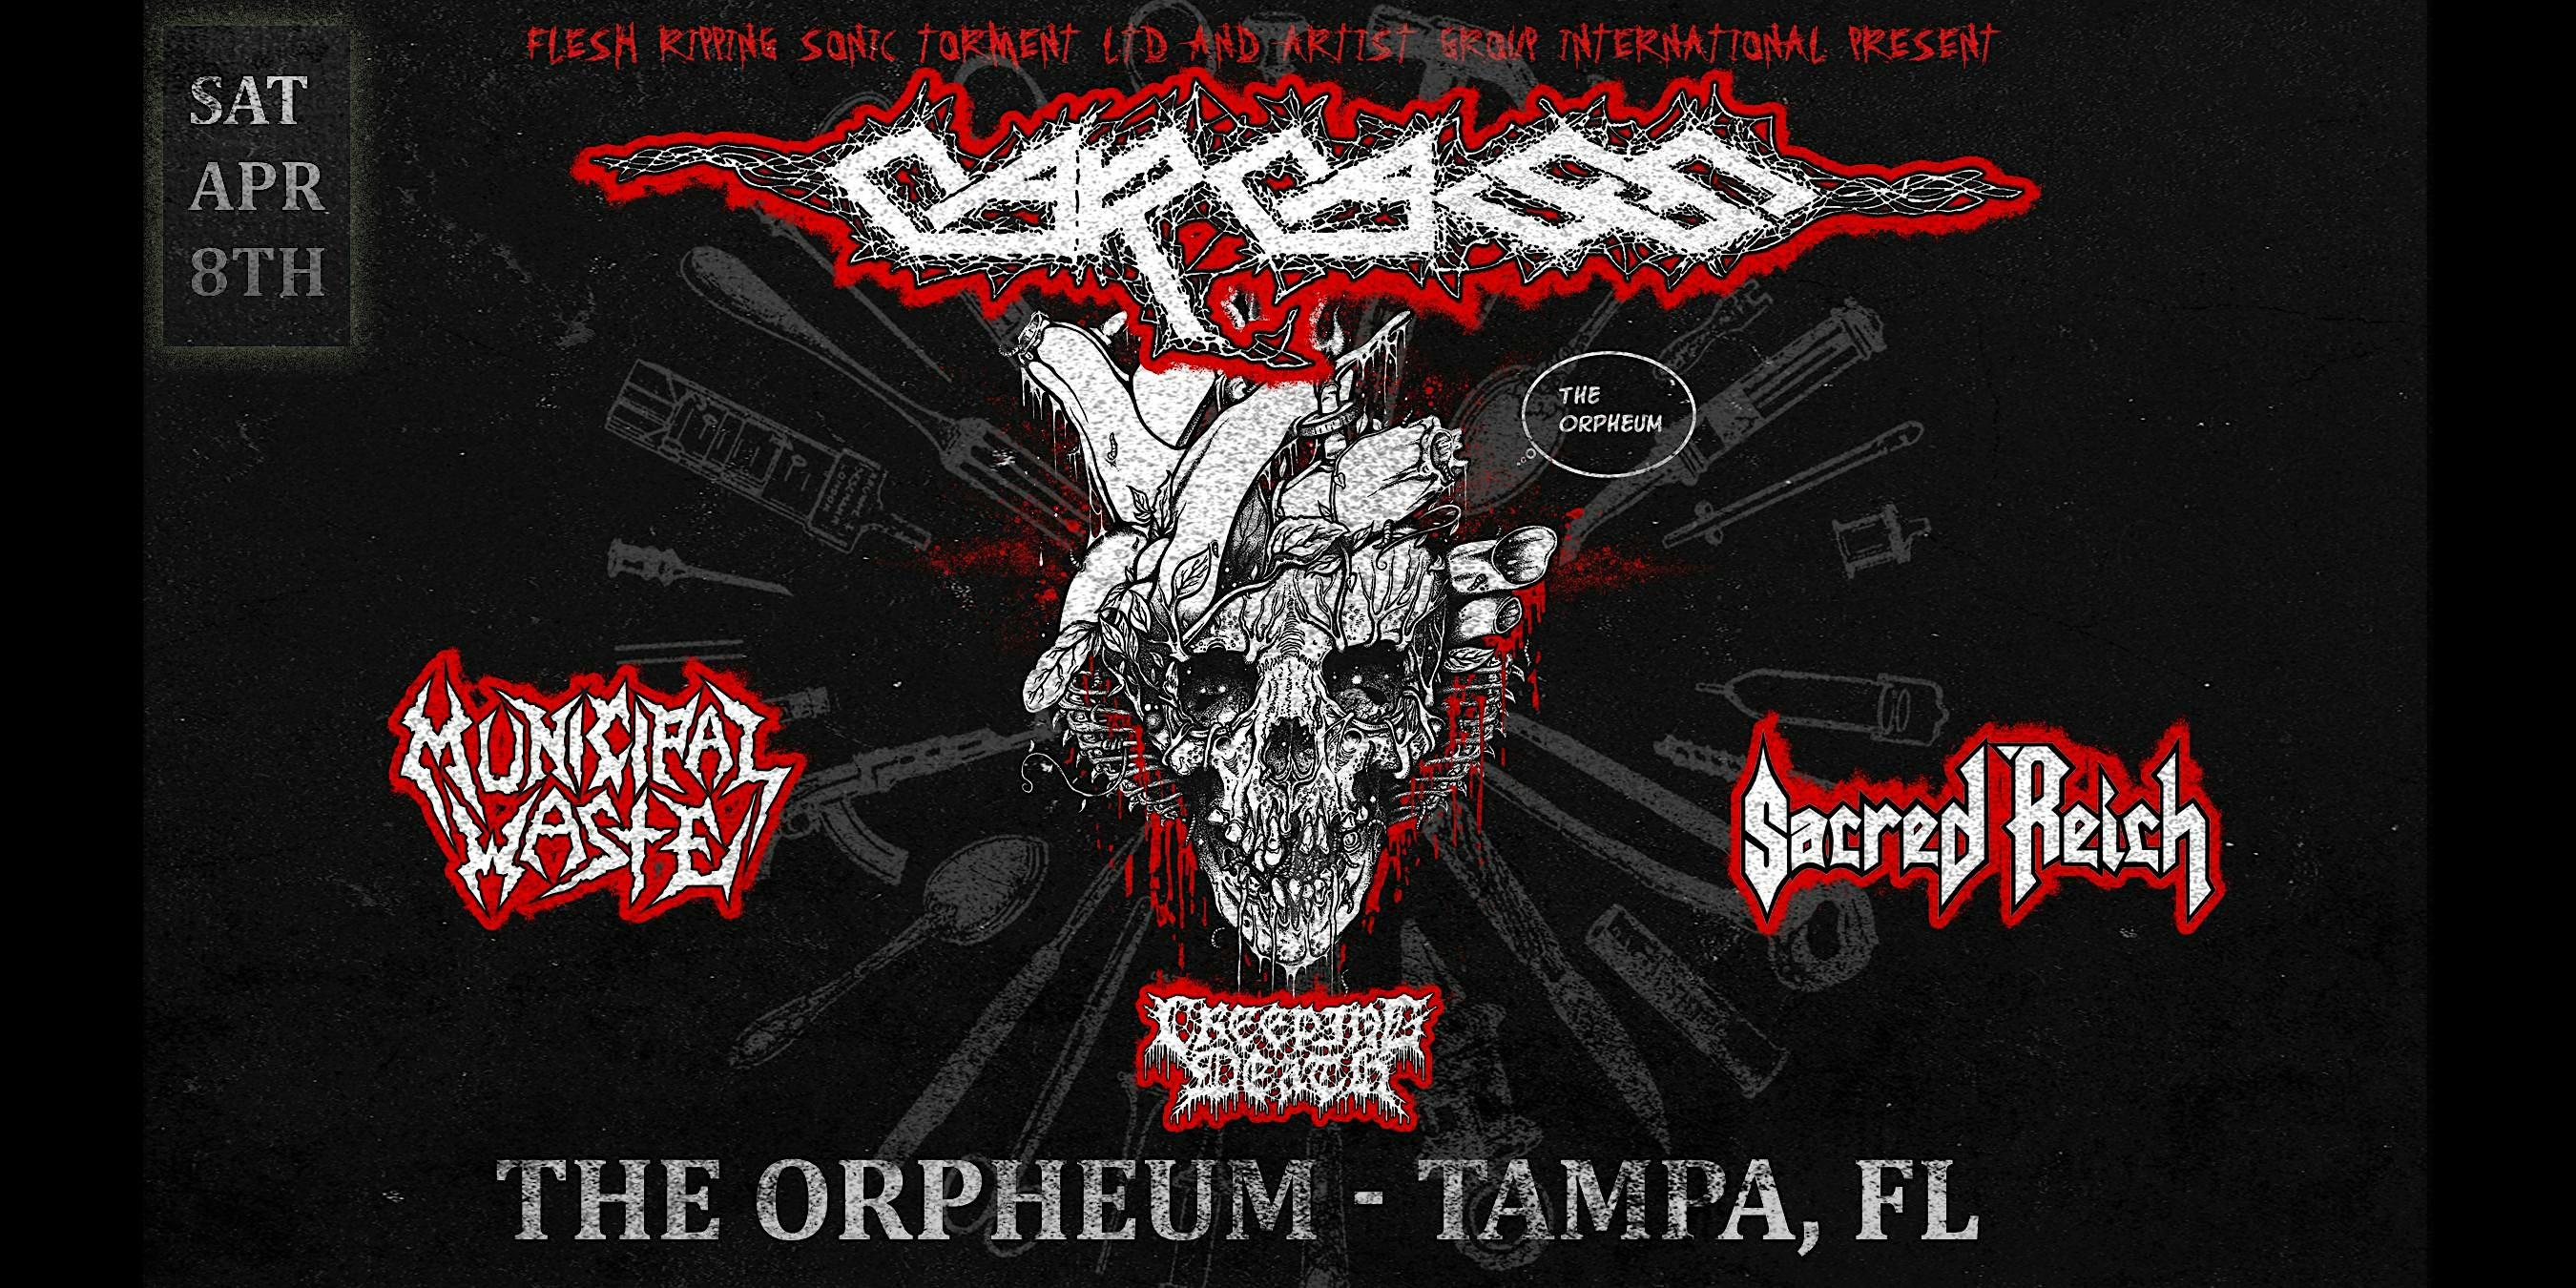 Carcass, Municipal Waste, Sacred Reich, and Creeping Death in Tampa at the Orpheum